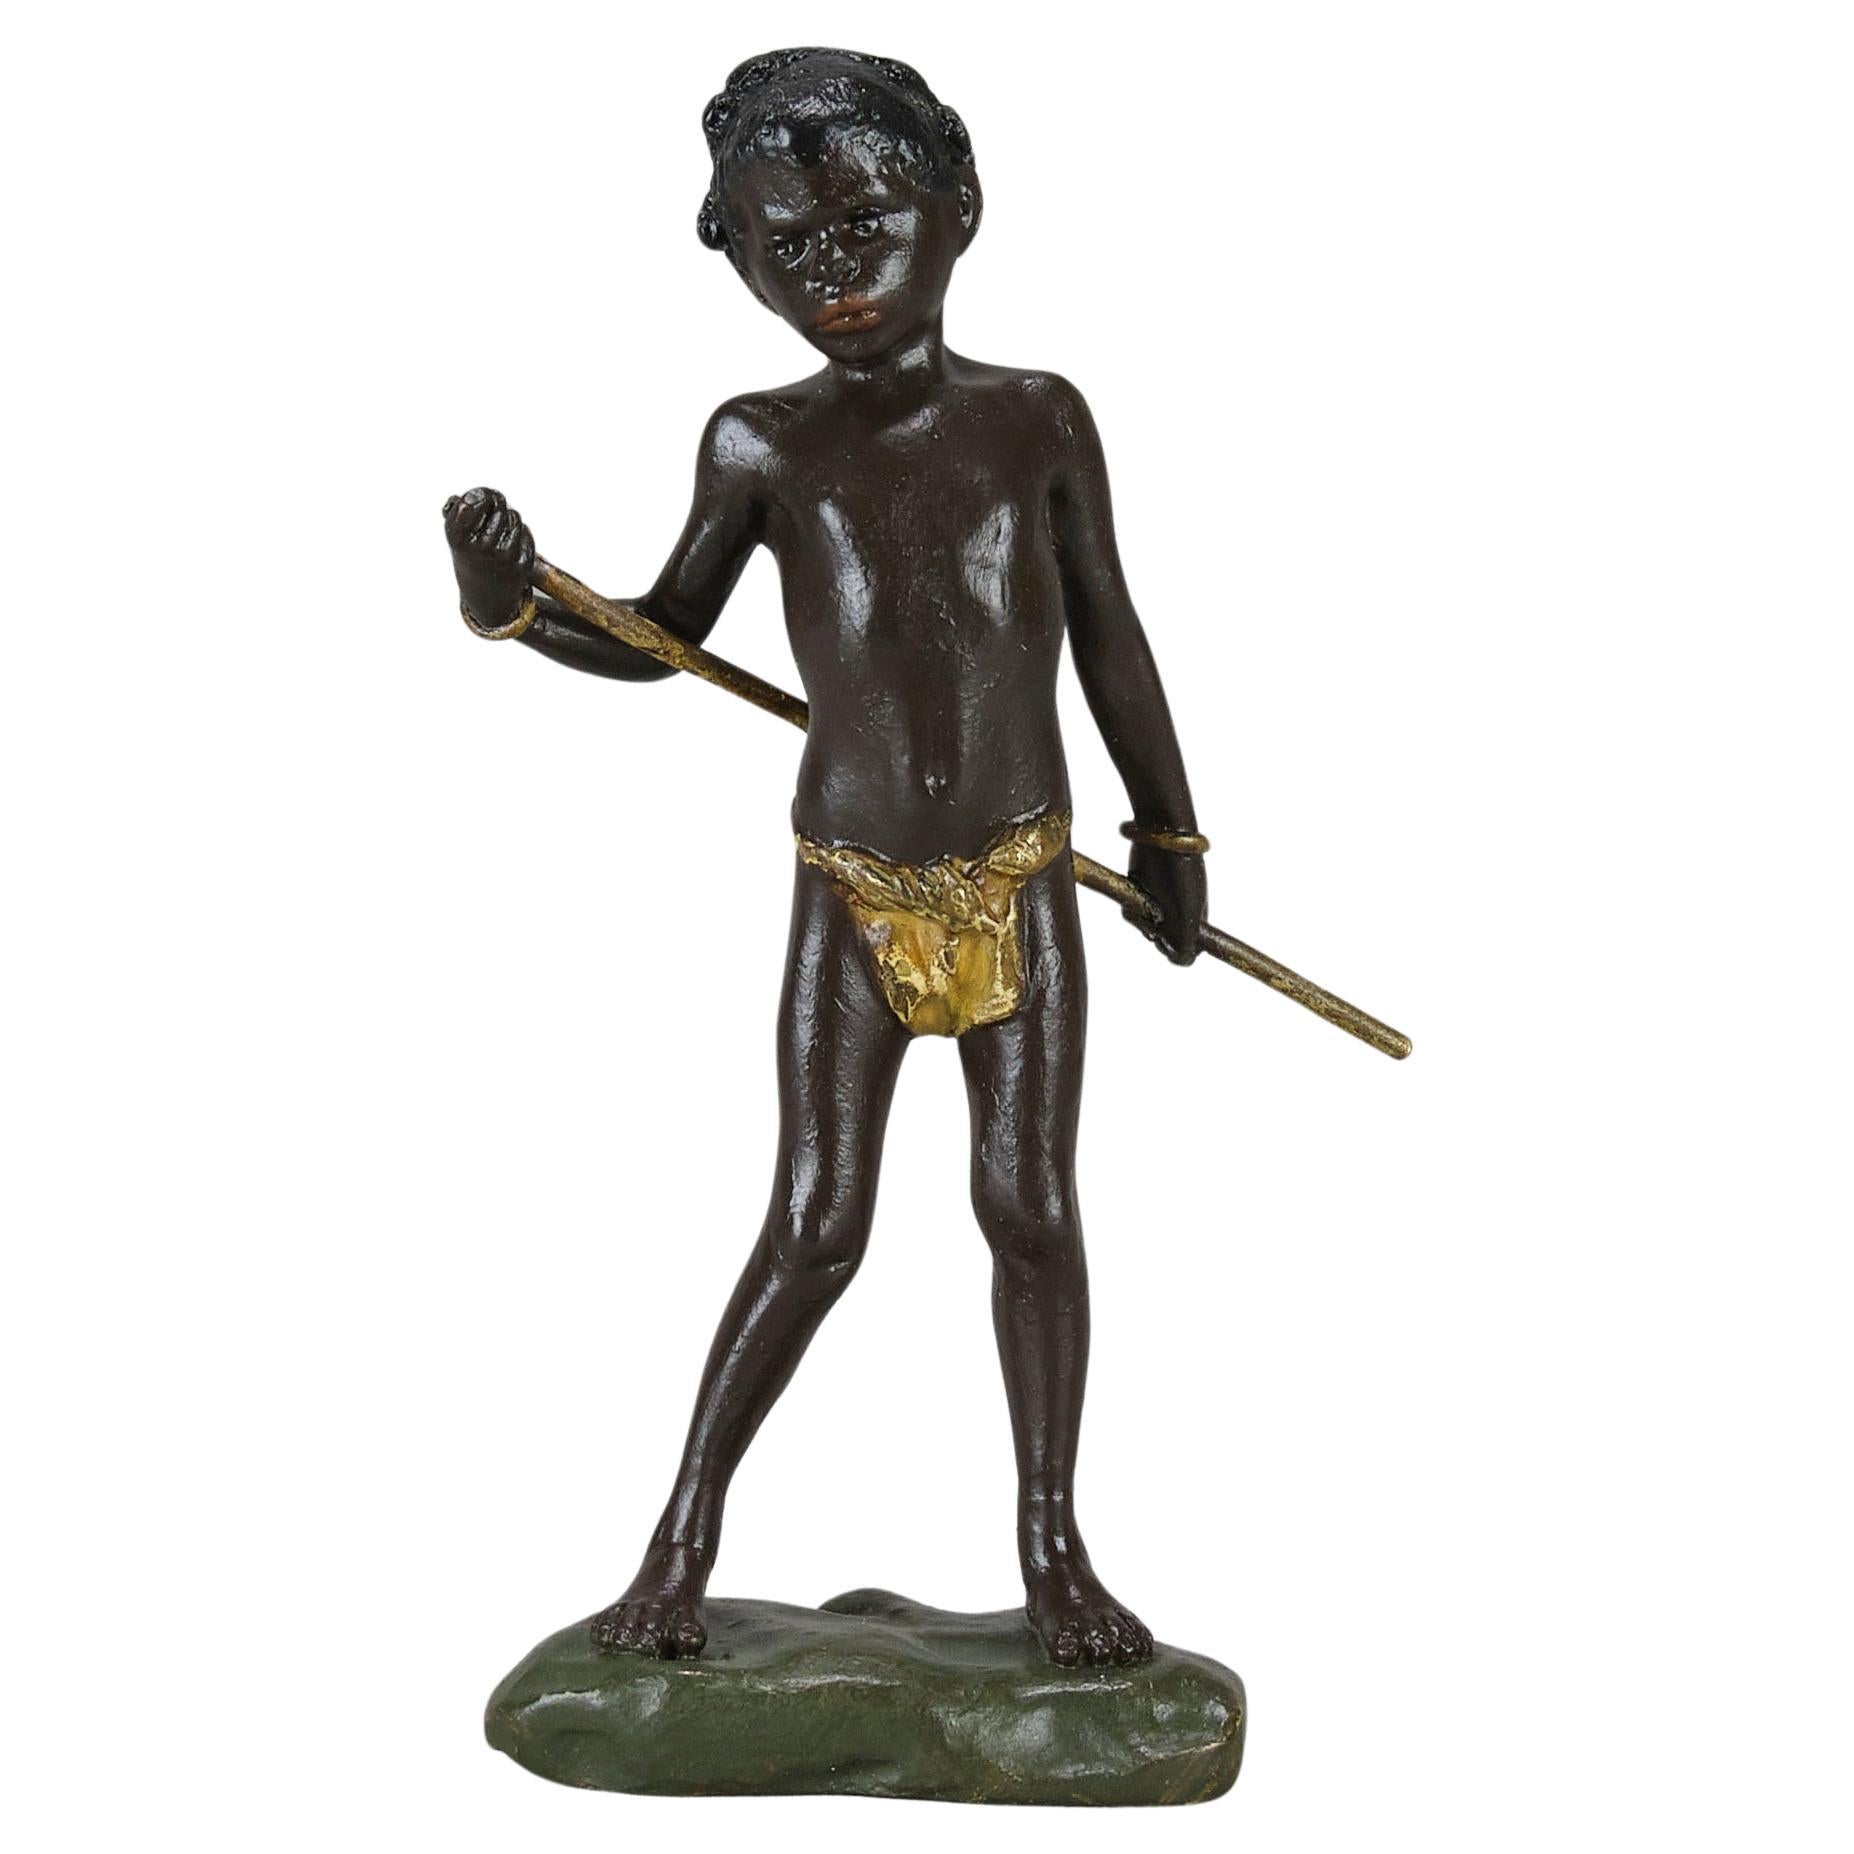 Early 20th Century Cold-Painted Bronze entitled "Arab Boy" by Franz Bergman For Sale